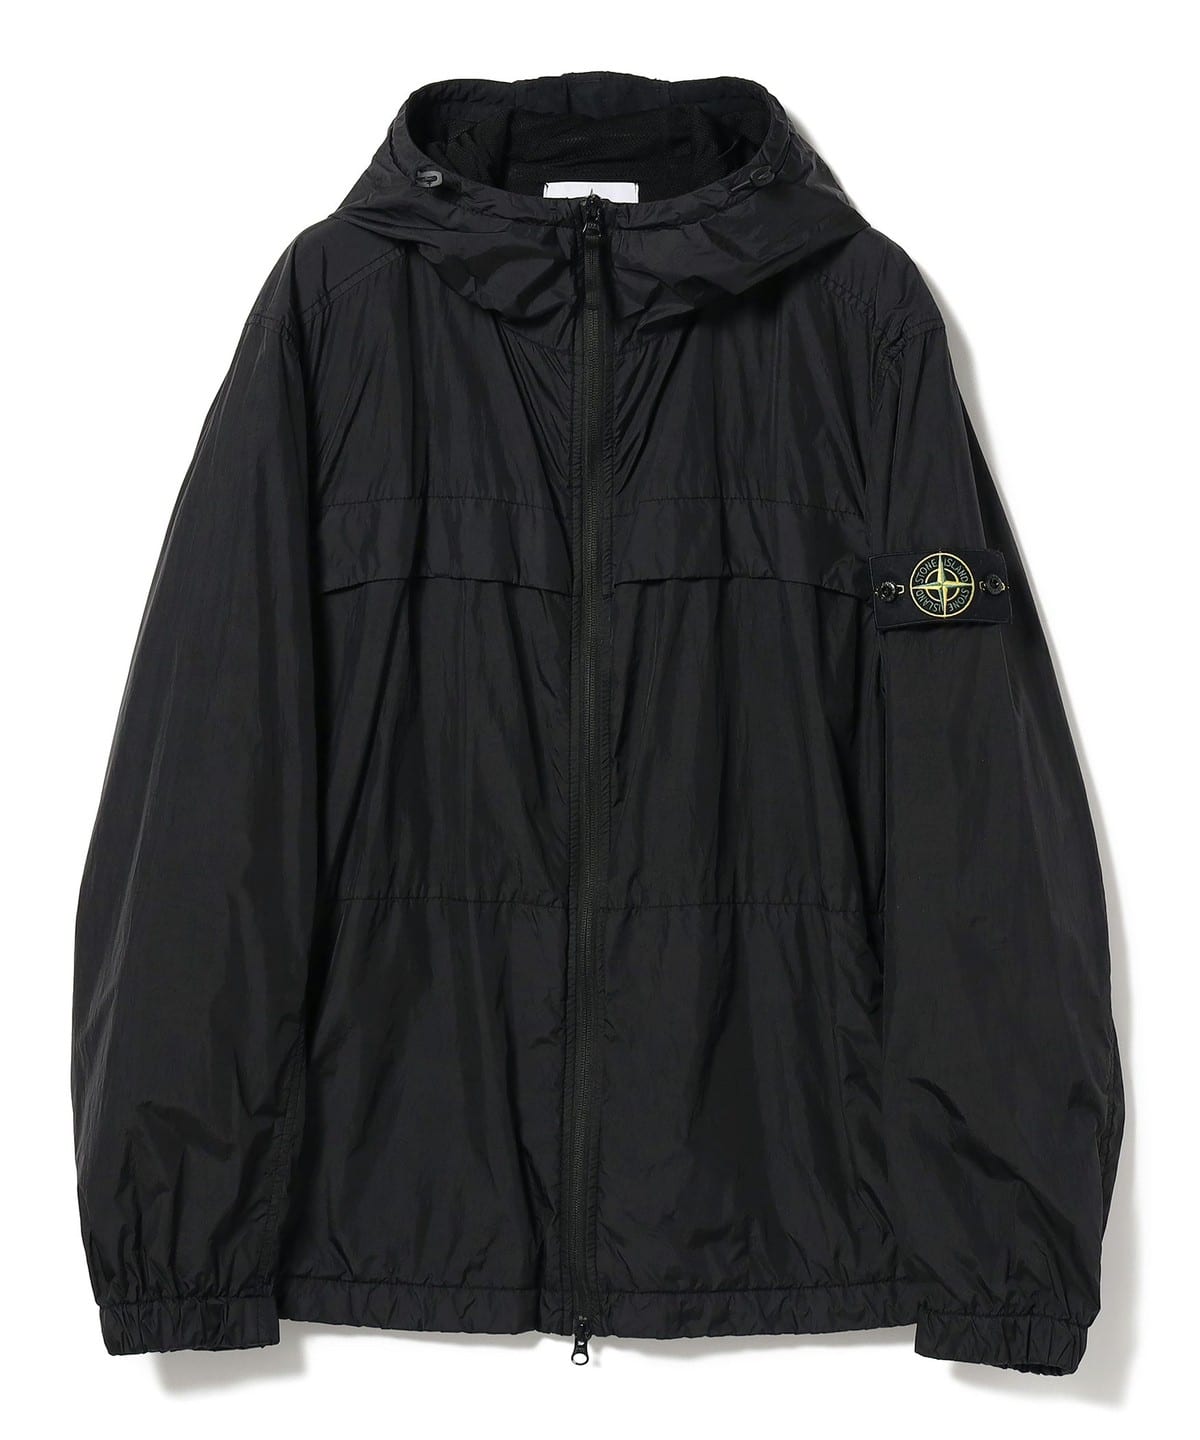 BEAMS（ビームス）STONE ISLAND / GARMENT DYED CRINKLE REPS R-NY 